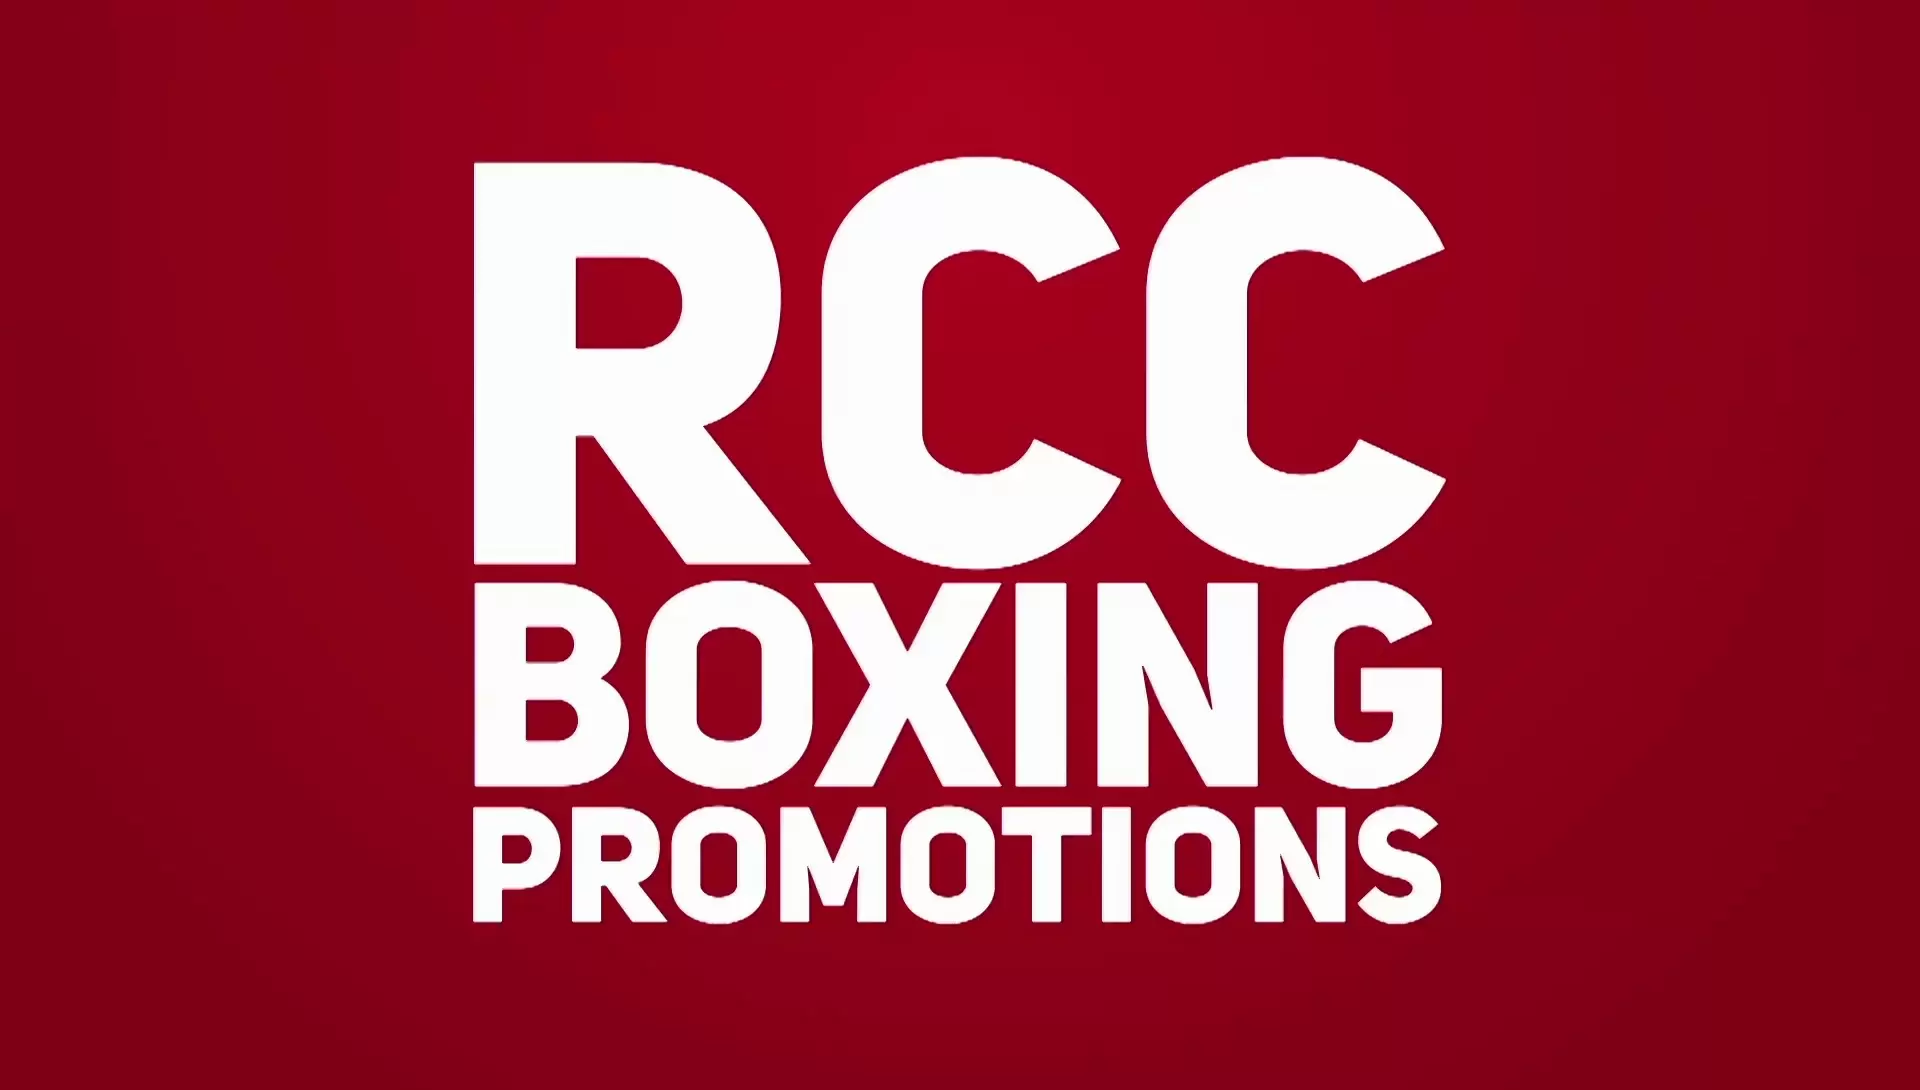 Boxing promotions